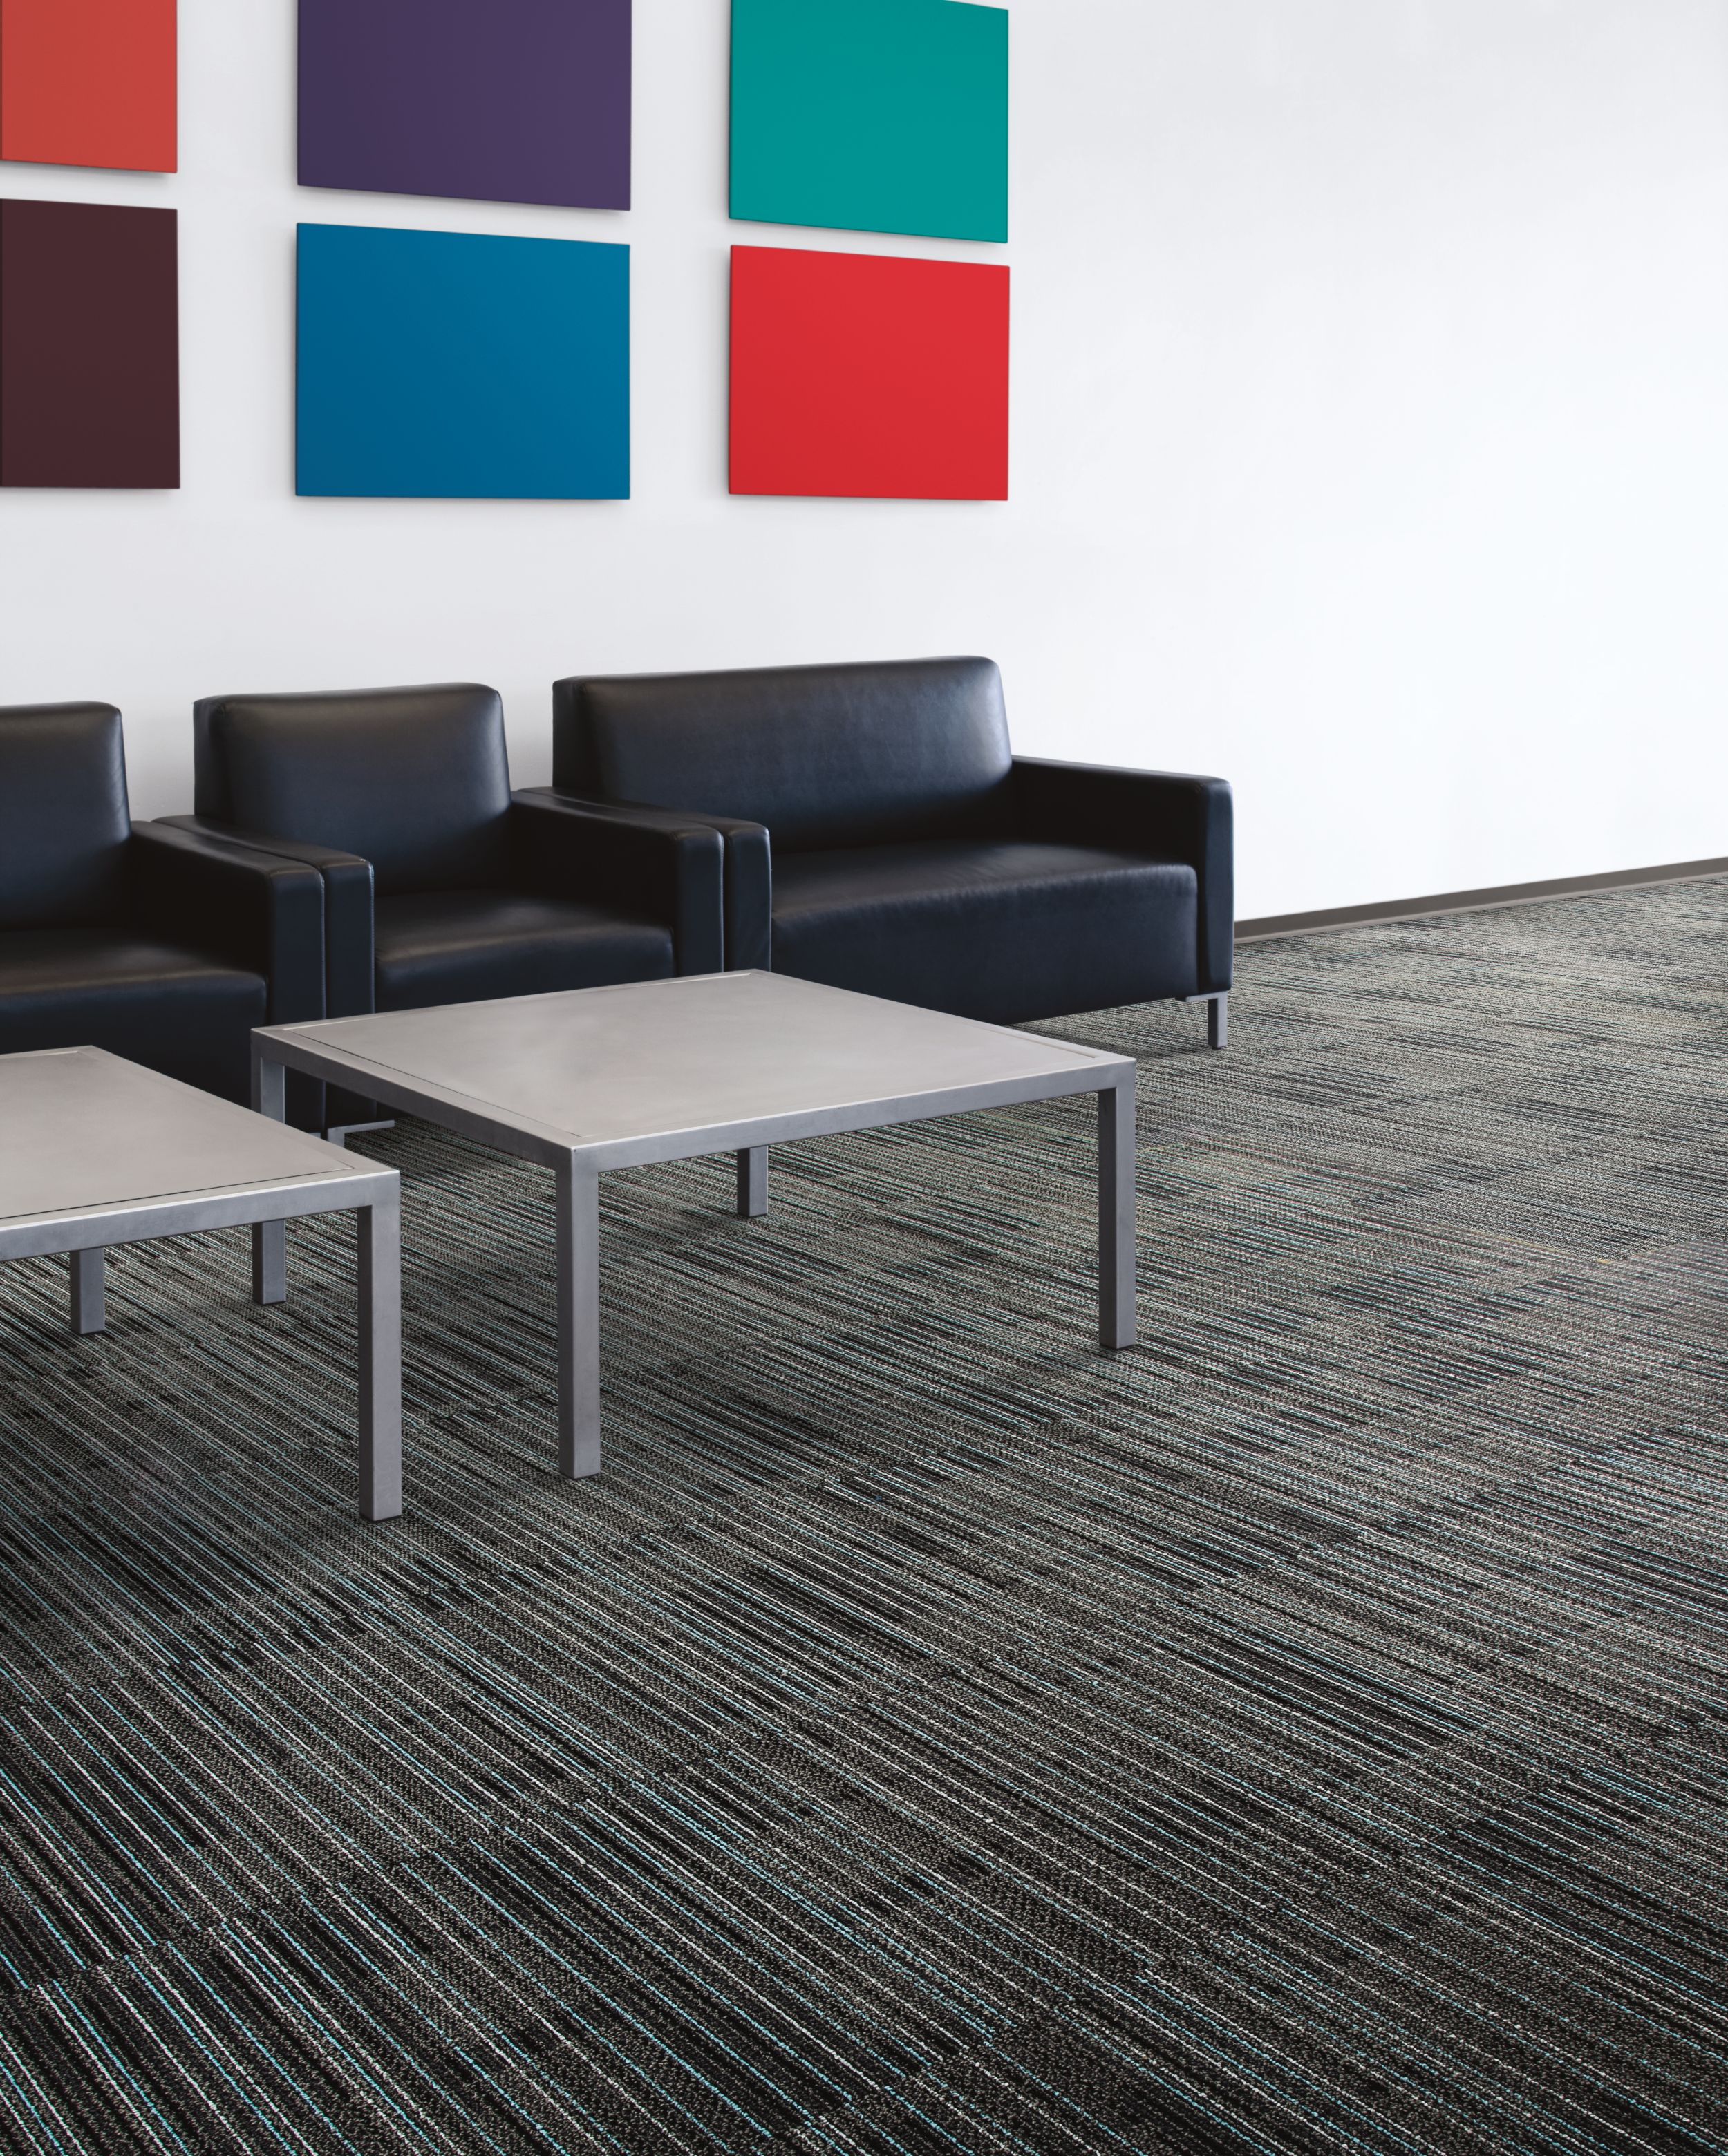 Interface Gather carpet tile in seating area with black chairs and colorful artwork image number 6